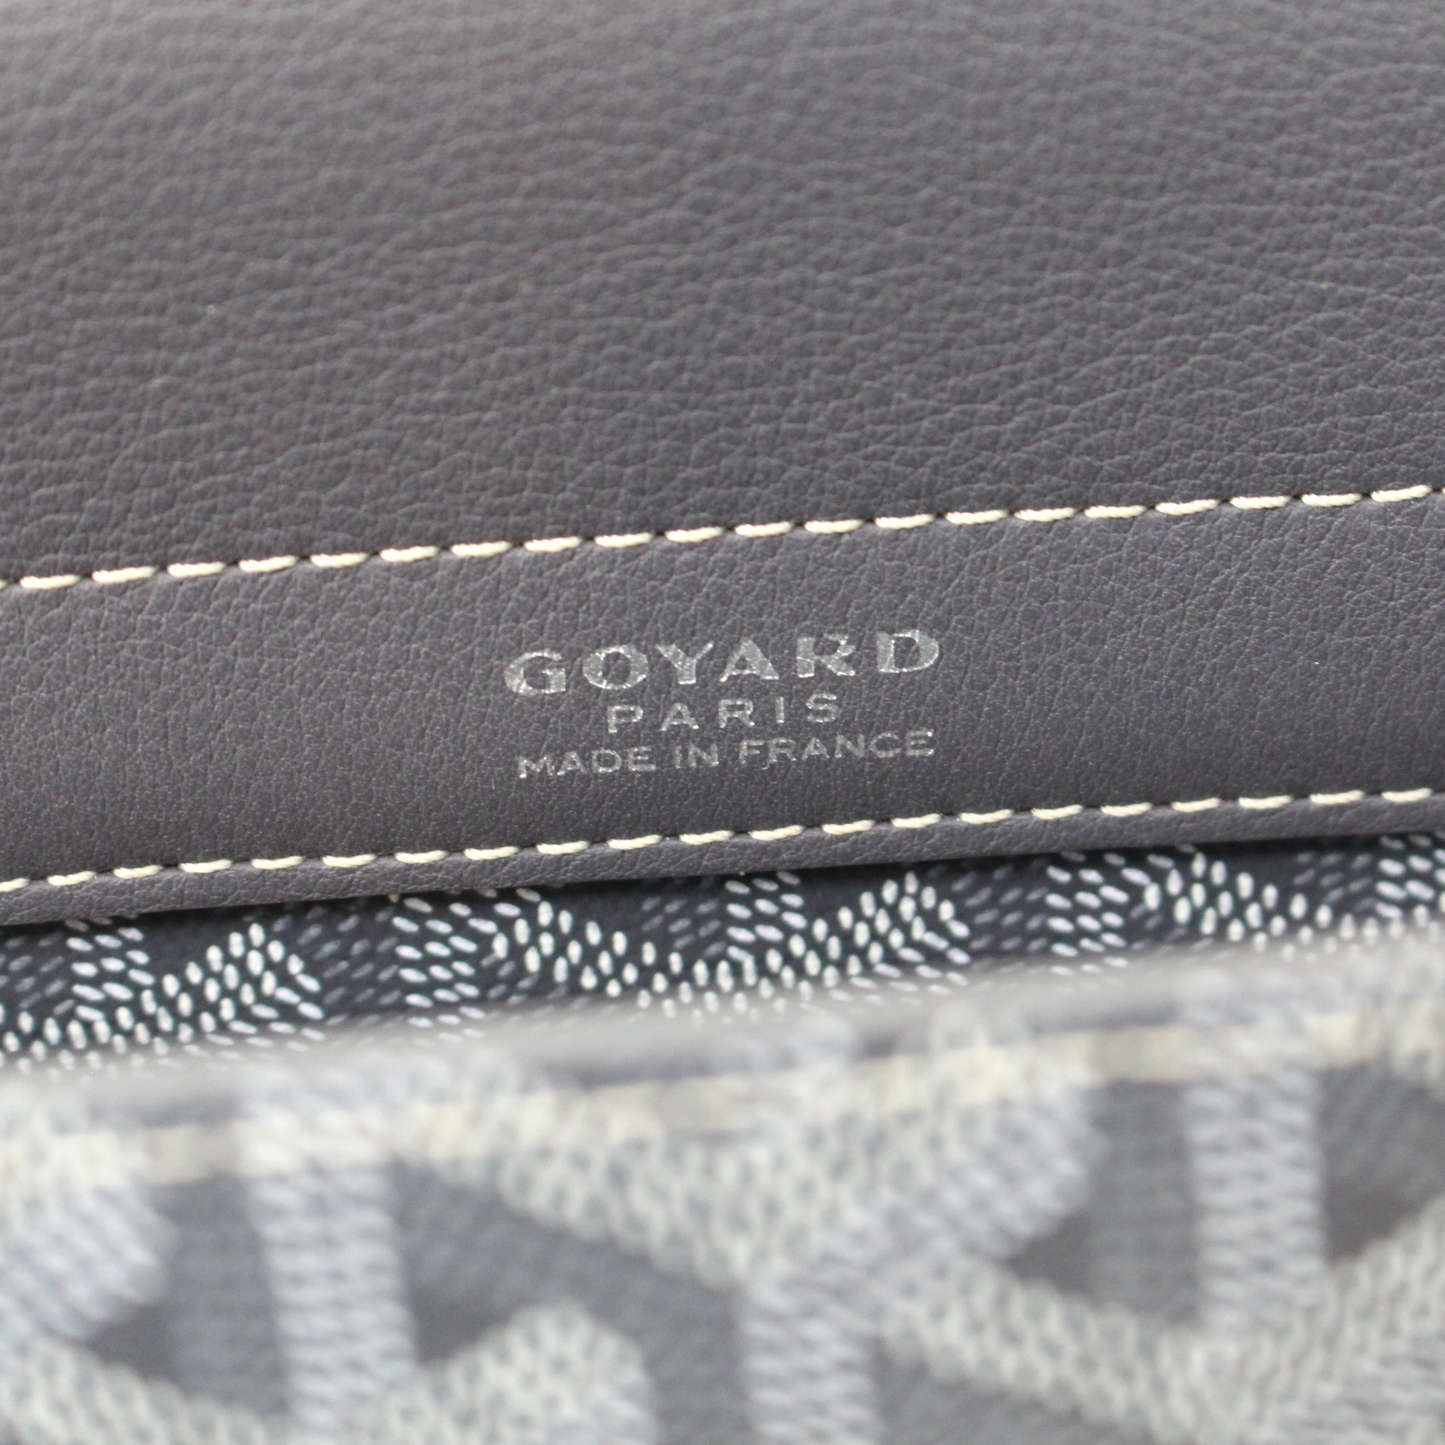 Goyard Rouette White. Made in France. With care cards ❤️